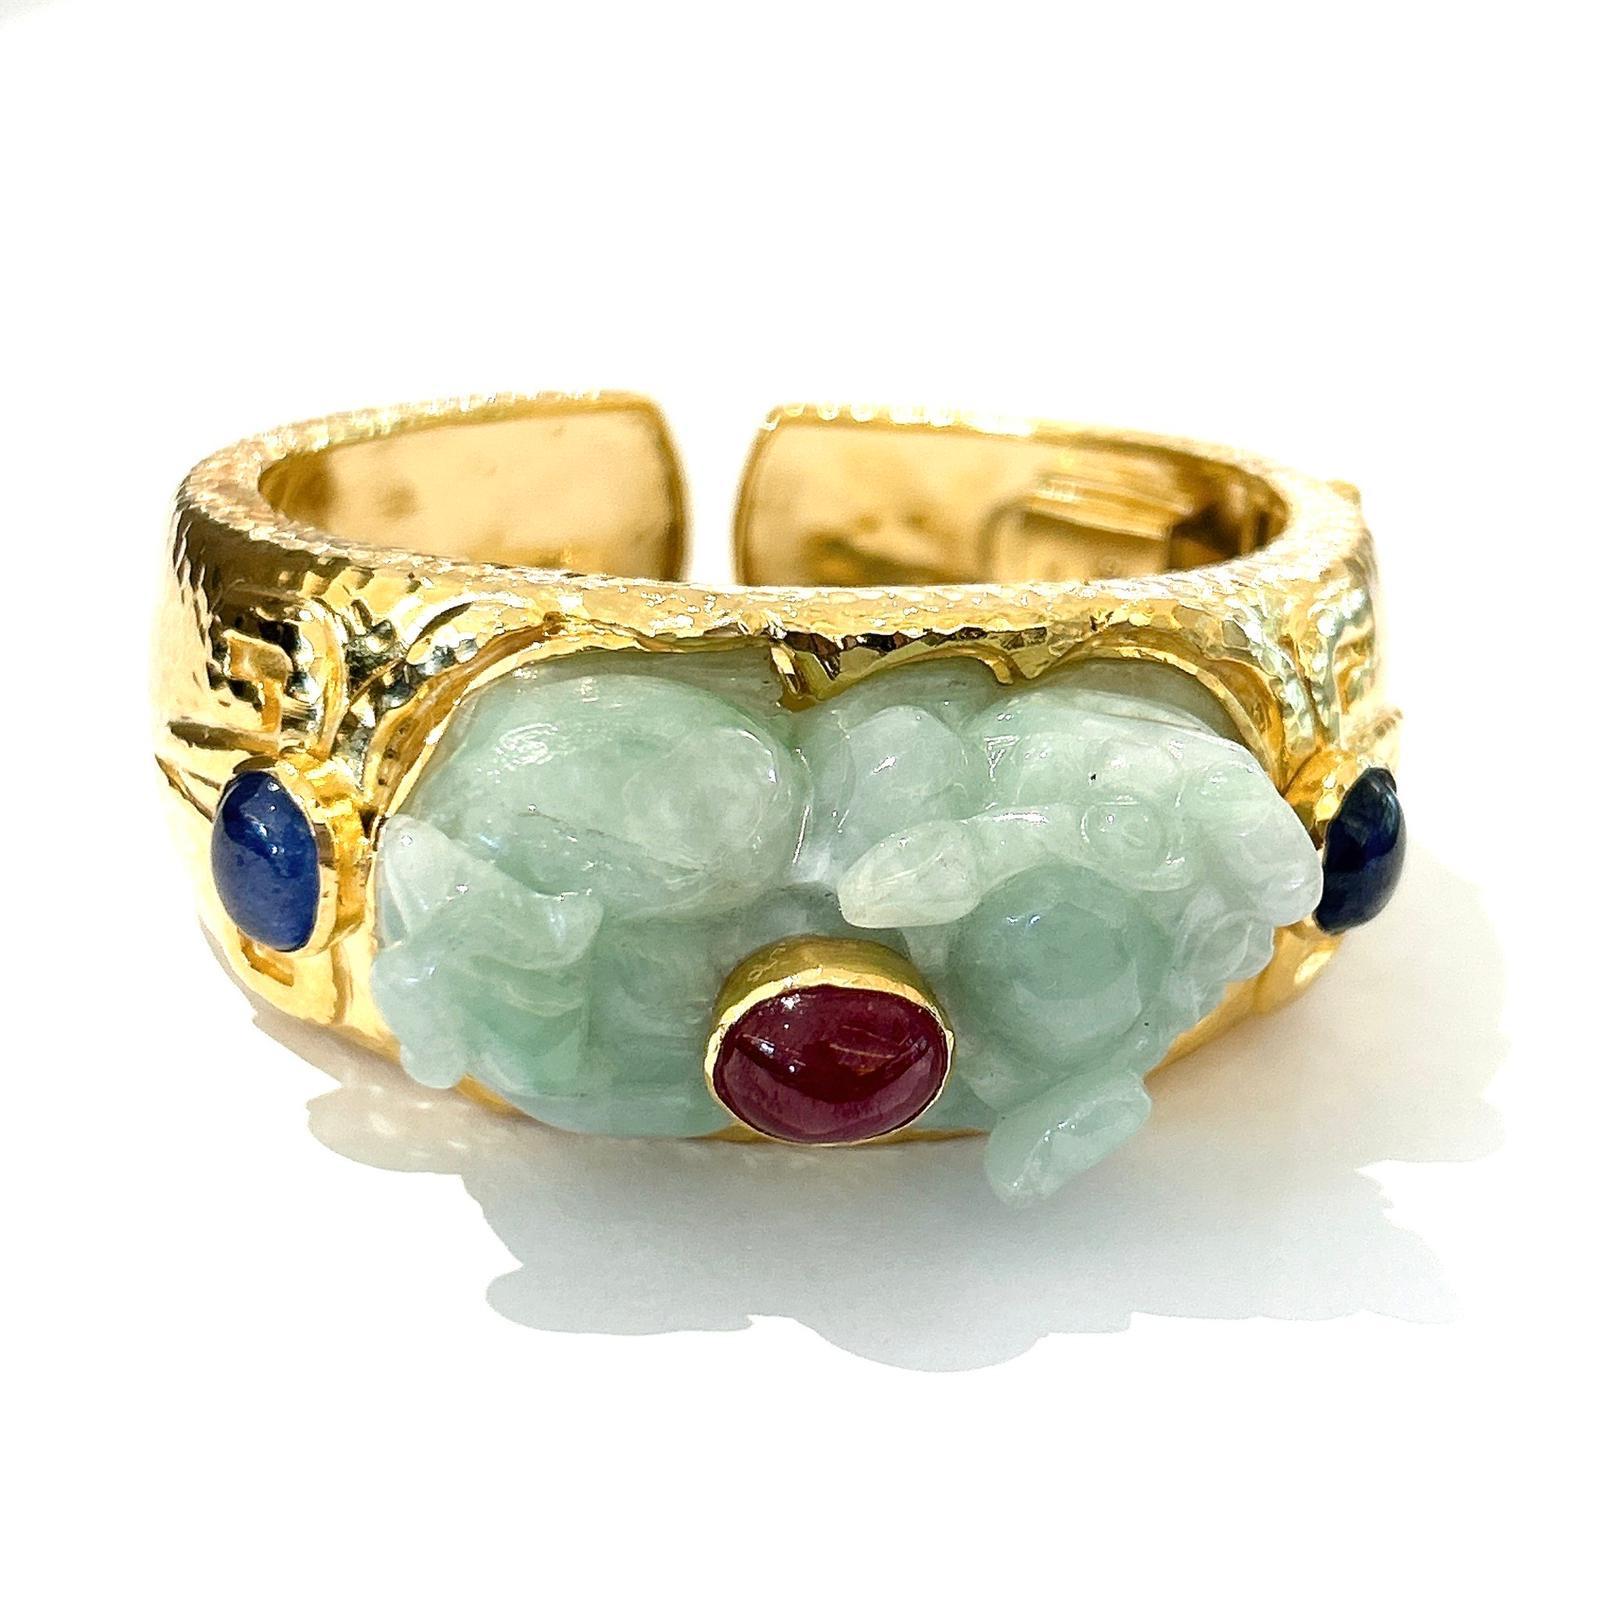 Bochic “Orient”  Ruby, Sapphires & Mint Jade Vintage Cuff Set In 18 K Gold & Silver 

Natural Cabochon Ruby - 6 carats 
Blue color sapphires - 5.00 carats 
Vintage Jade from China 
Mint green 
Rabbit shape carving for good luck

This Bangle is from